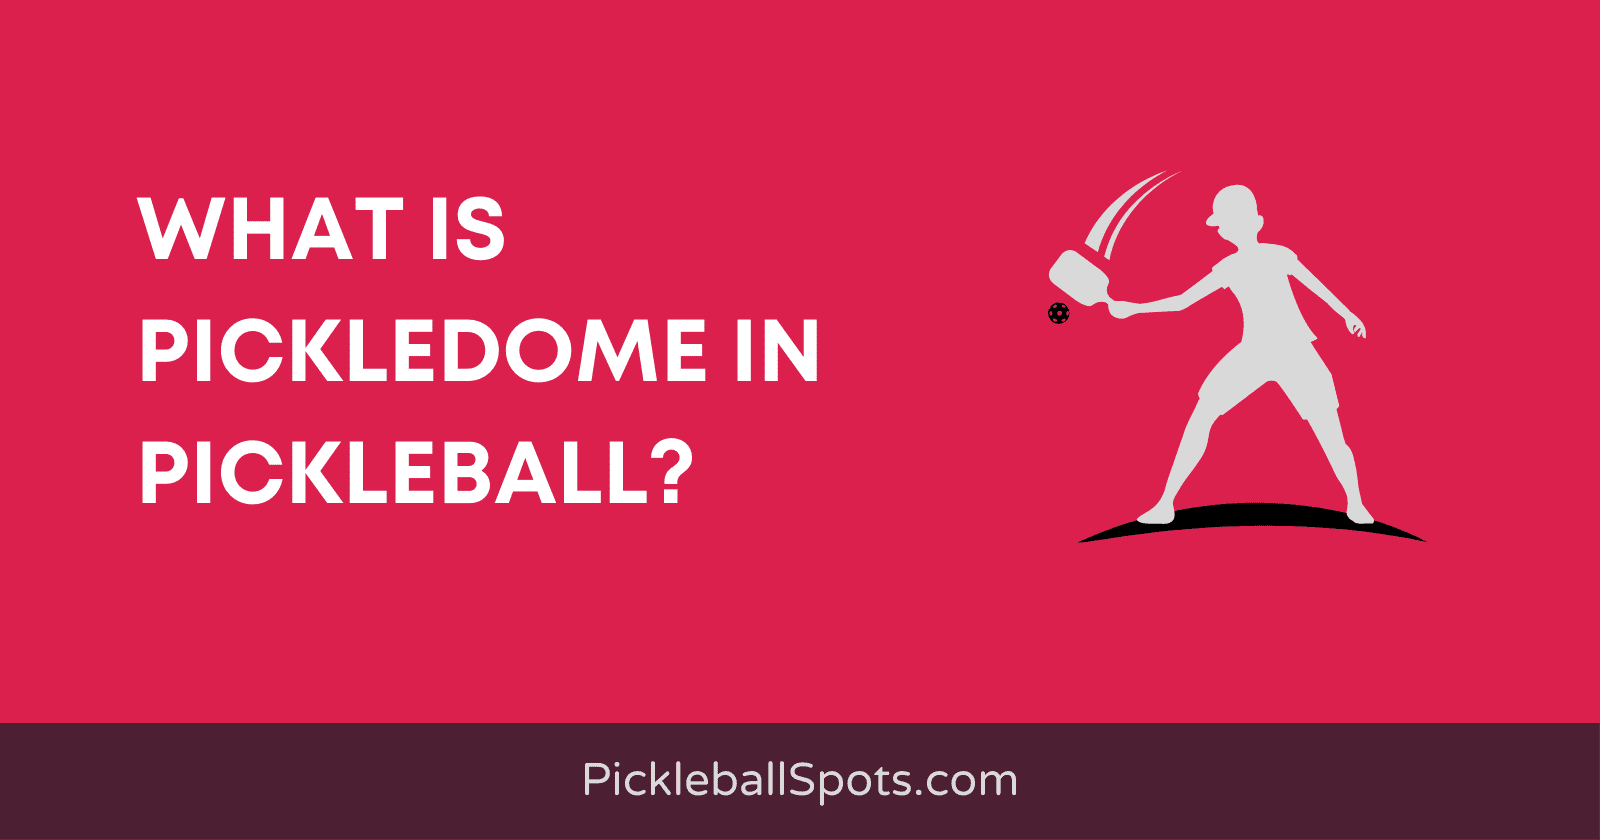 What Is Pickledome In Pickleball